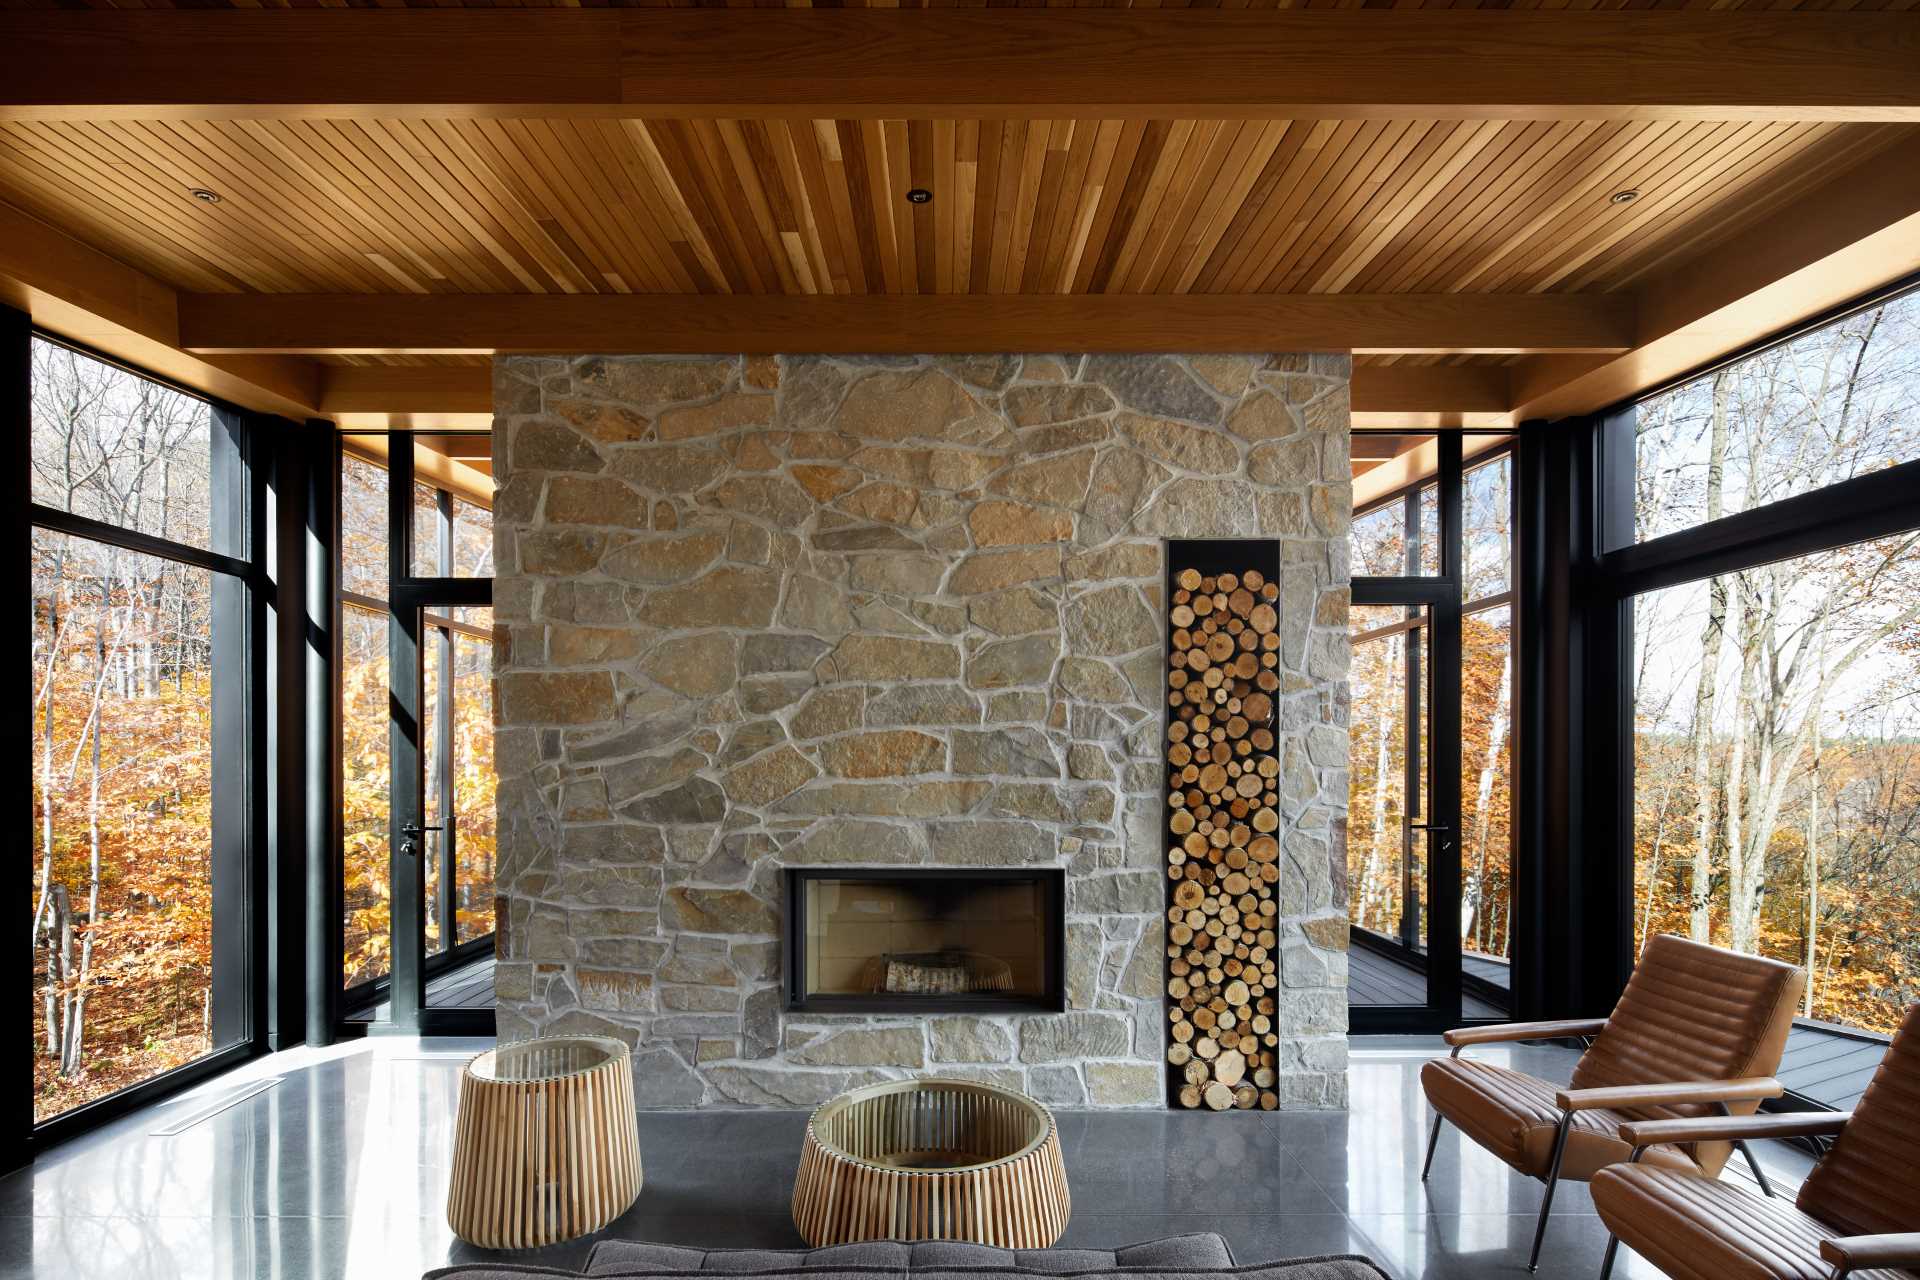 A sitting area with a wood-burning fireplace integrated into a massive stone wall soothes the room and offers a warm contrast to the raw materials of concrete, steel, and glass.